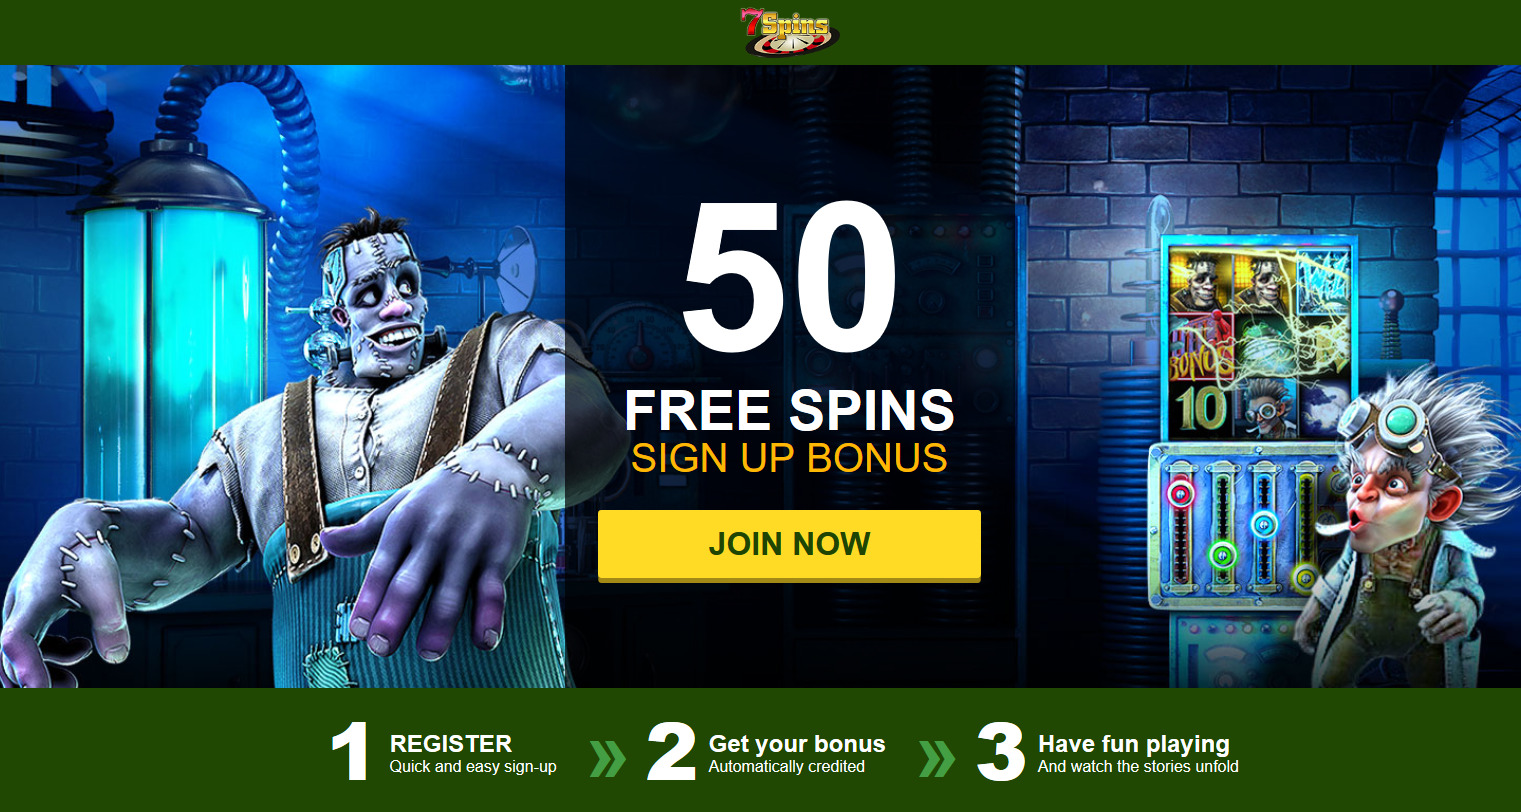 7Spins  Deposit and get your bonuses